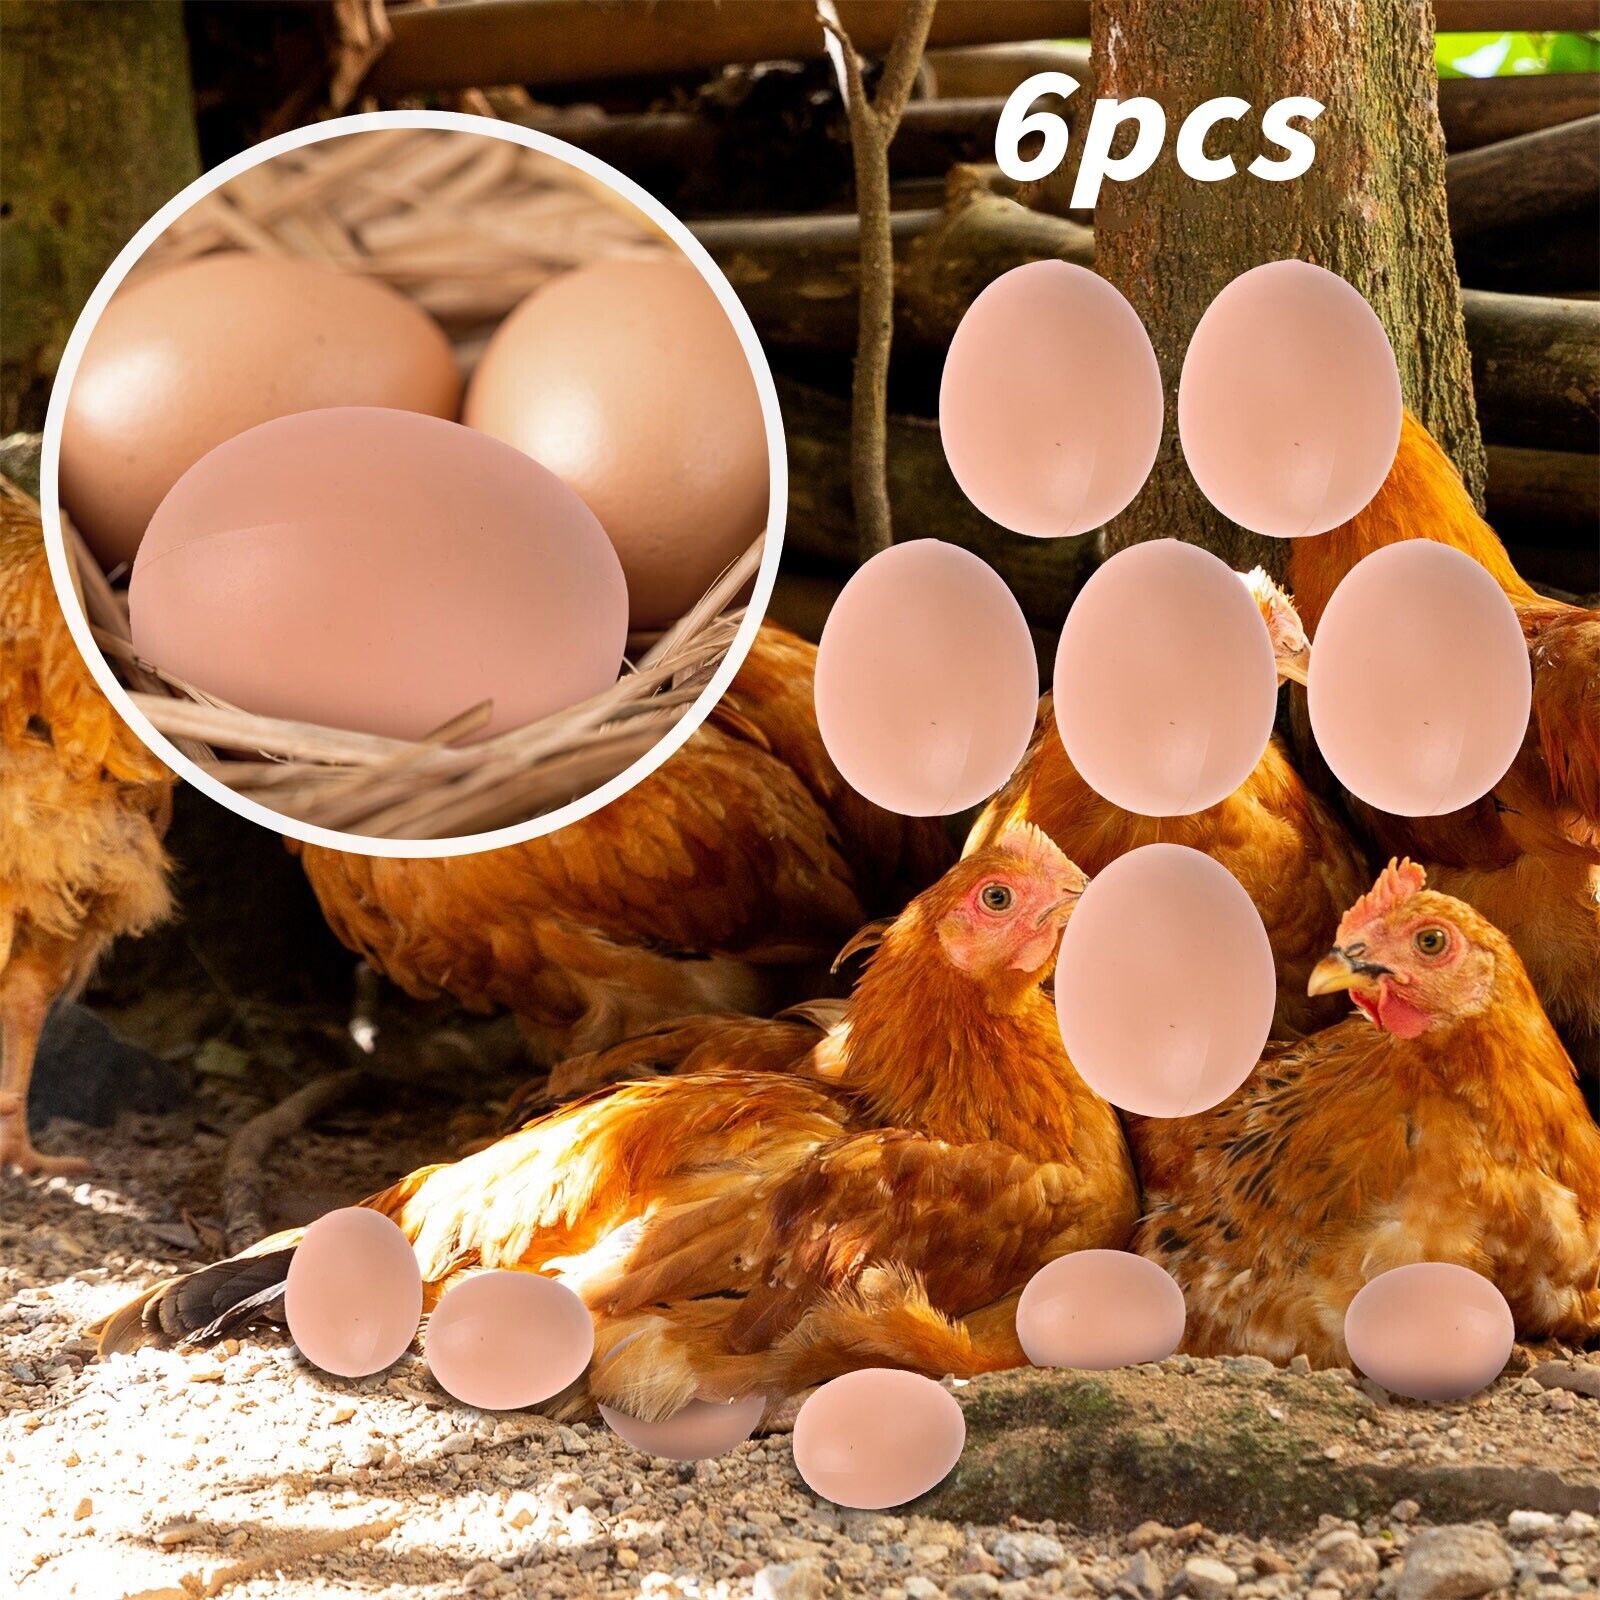 6Pcs Wooden Brown Fake Nest Eggs Easter Eggs for Craft Get Hens to Lay Eggs